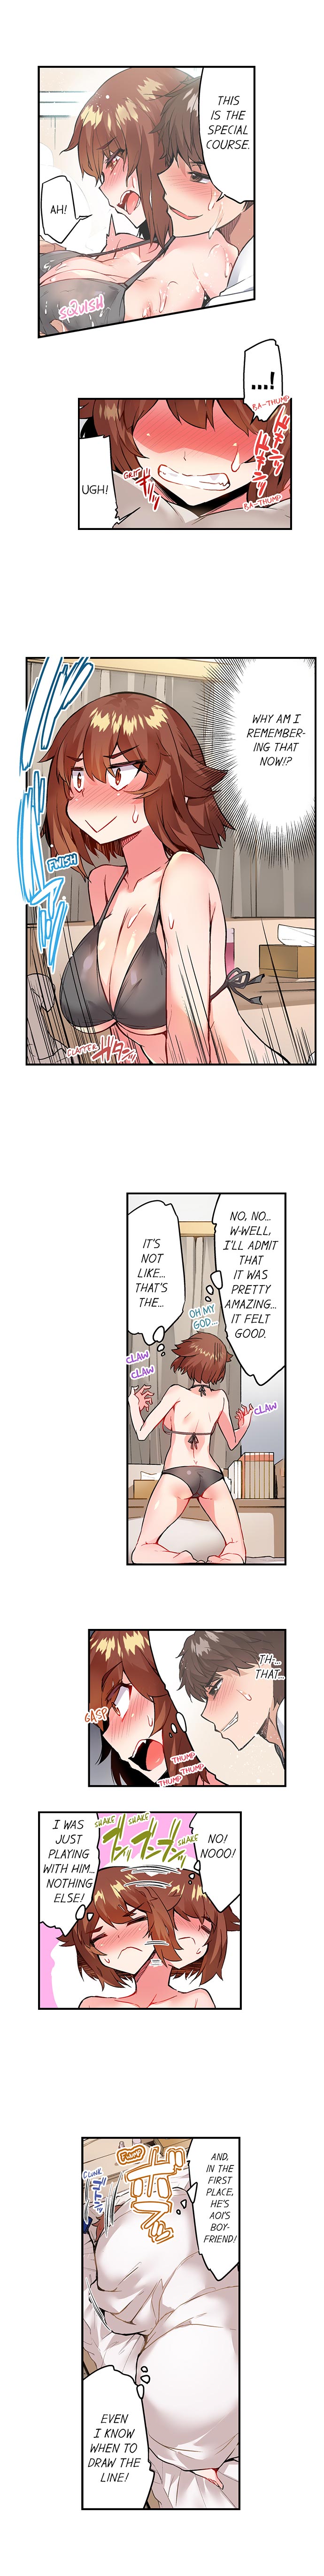 Traditional Job of Washing Girls’ Body - Chapter 121 Page 7